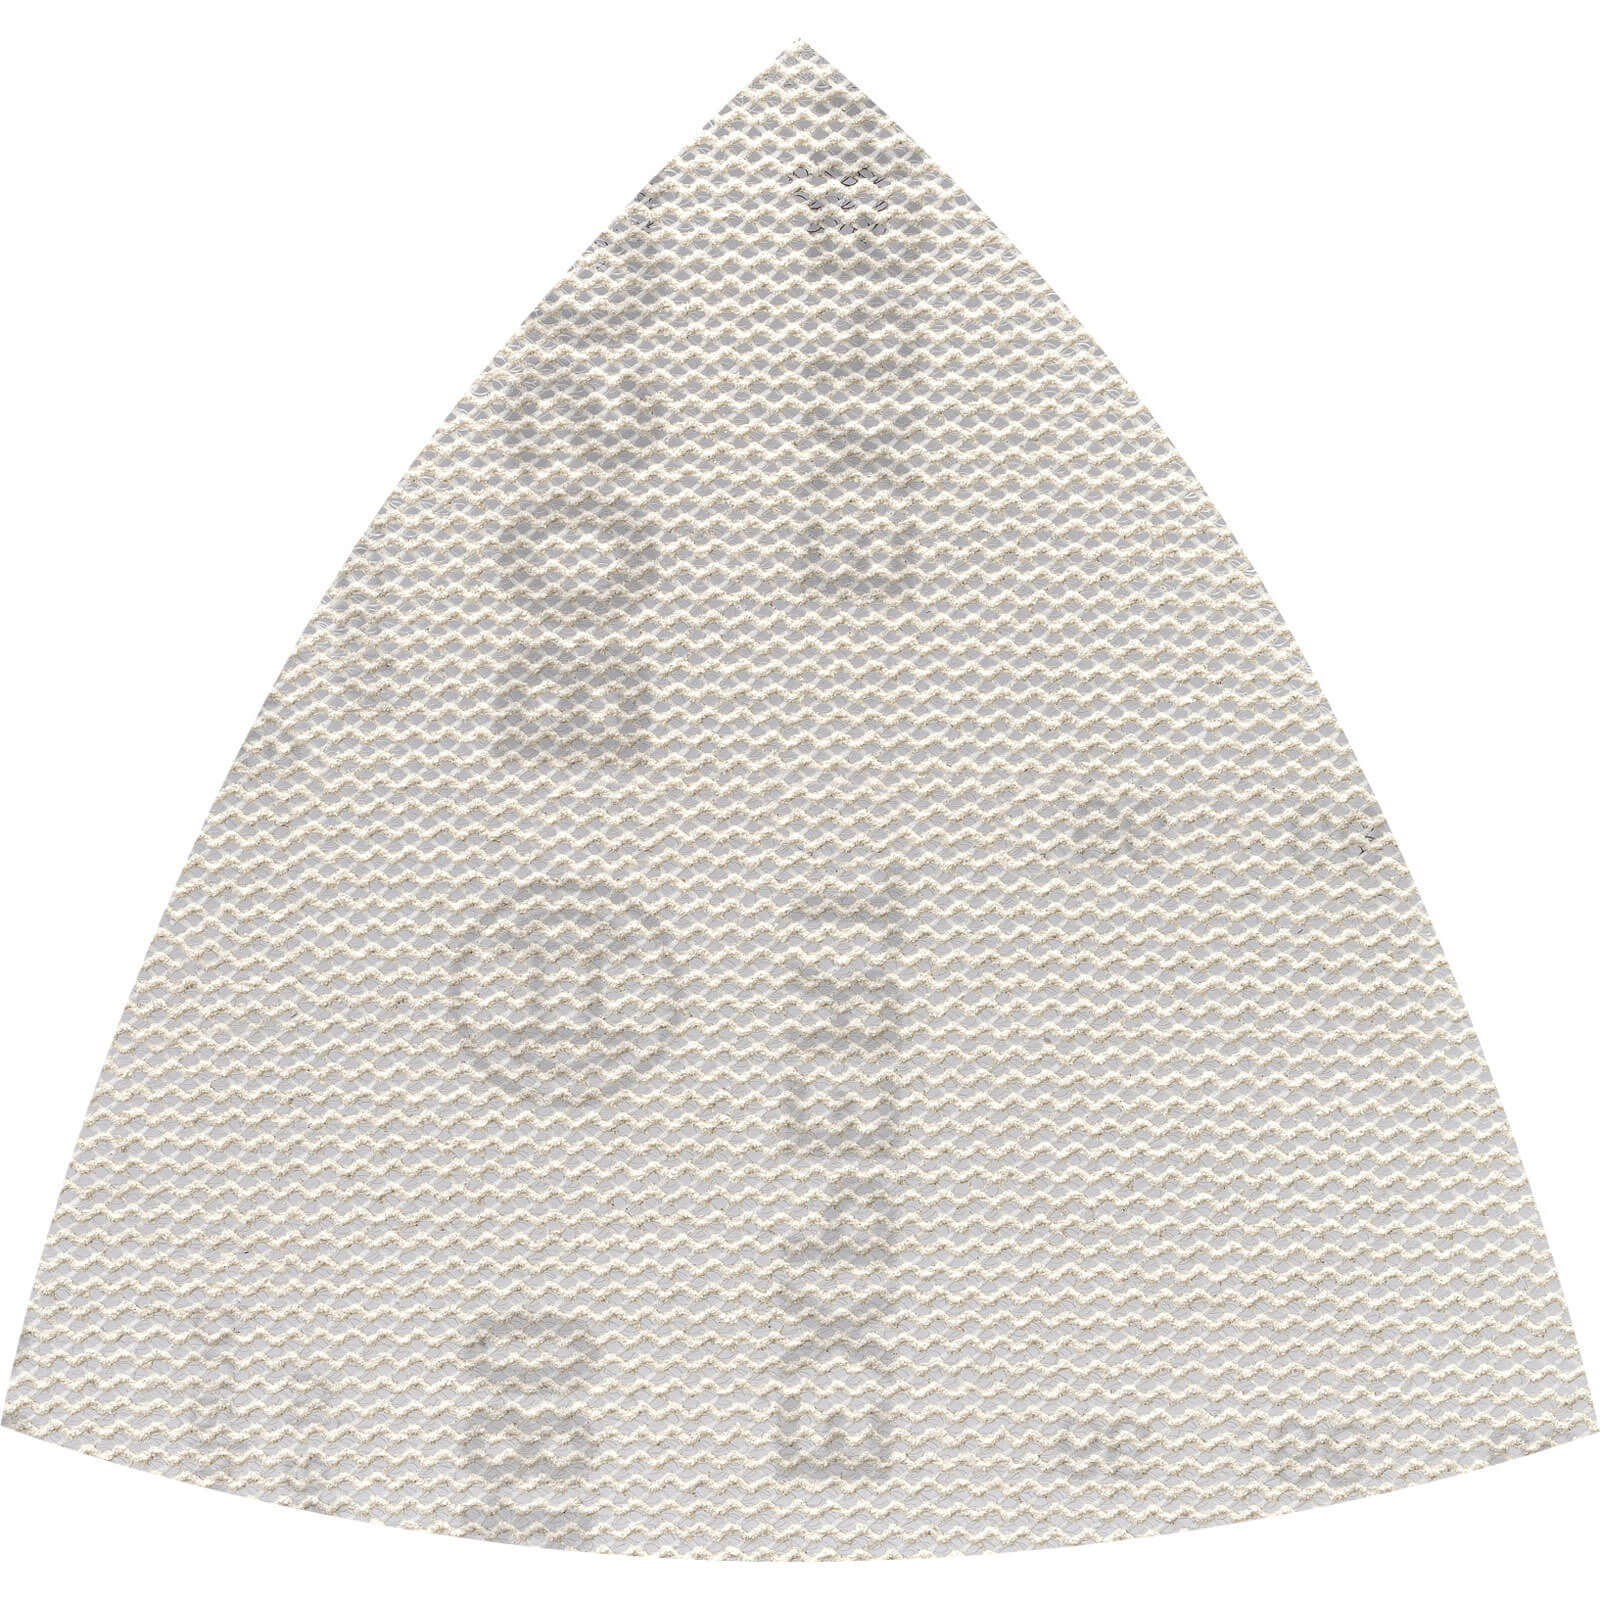 Image of Bosch Expert M480 Quick Fit Net Delta Sanding Sheets for Paint and Wood 93mm x 93mm 240g Pack of 5